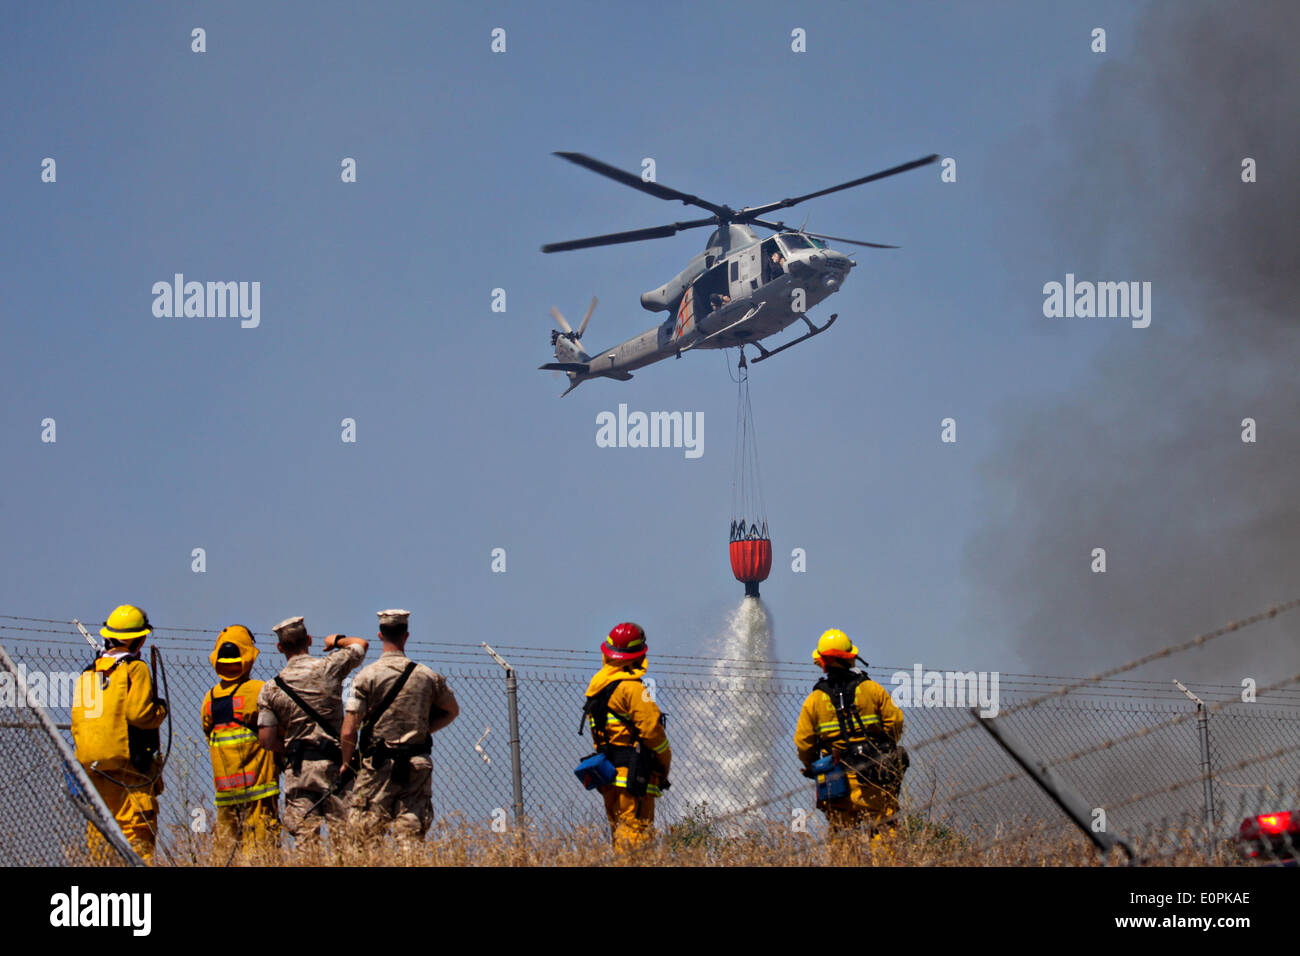 A US Marine Corps helicopter drops water from a Bambi bucket to help fight the Tomahawk and Las Pulgas wildfires as they burn the foothills May 17, 2014 around Camp Pendleton, California.  Evacuations forced more than 13,000 people from their homes as the fire burned across San Diego County. Stock Photo